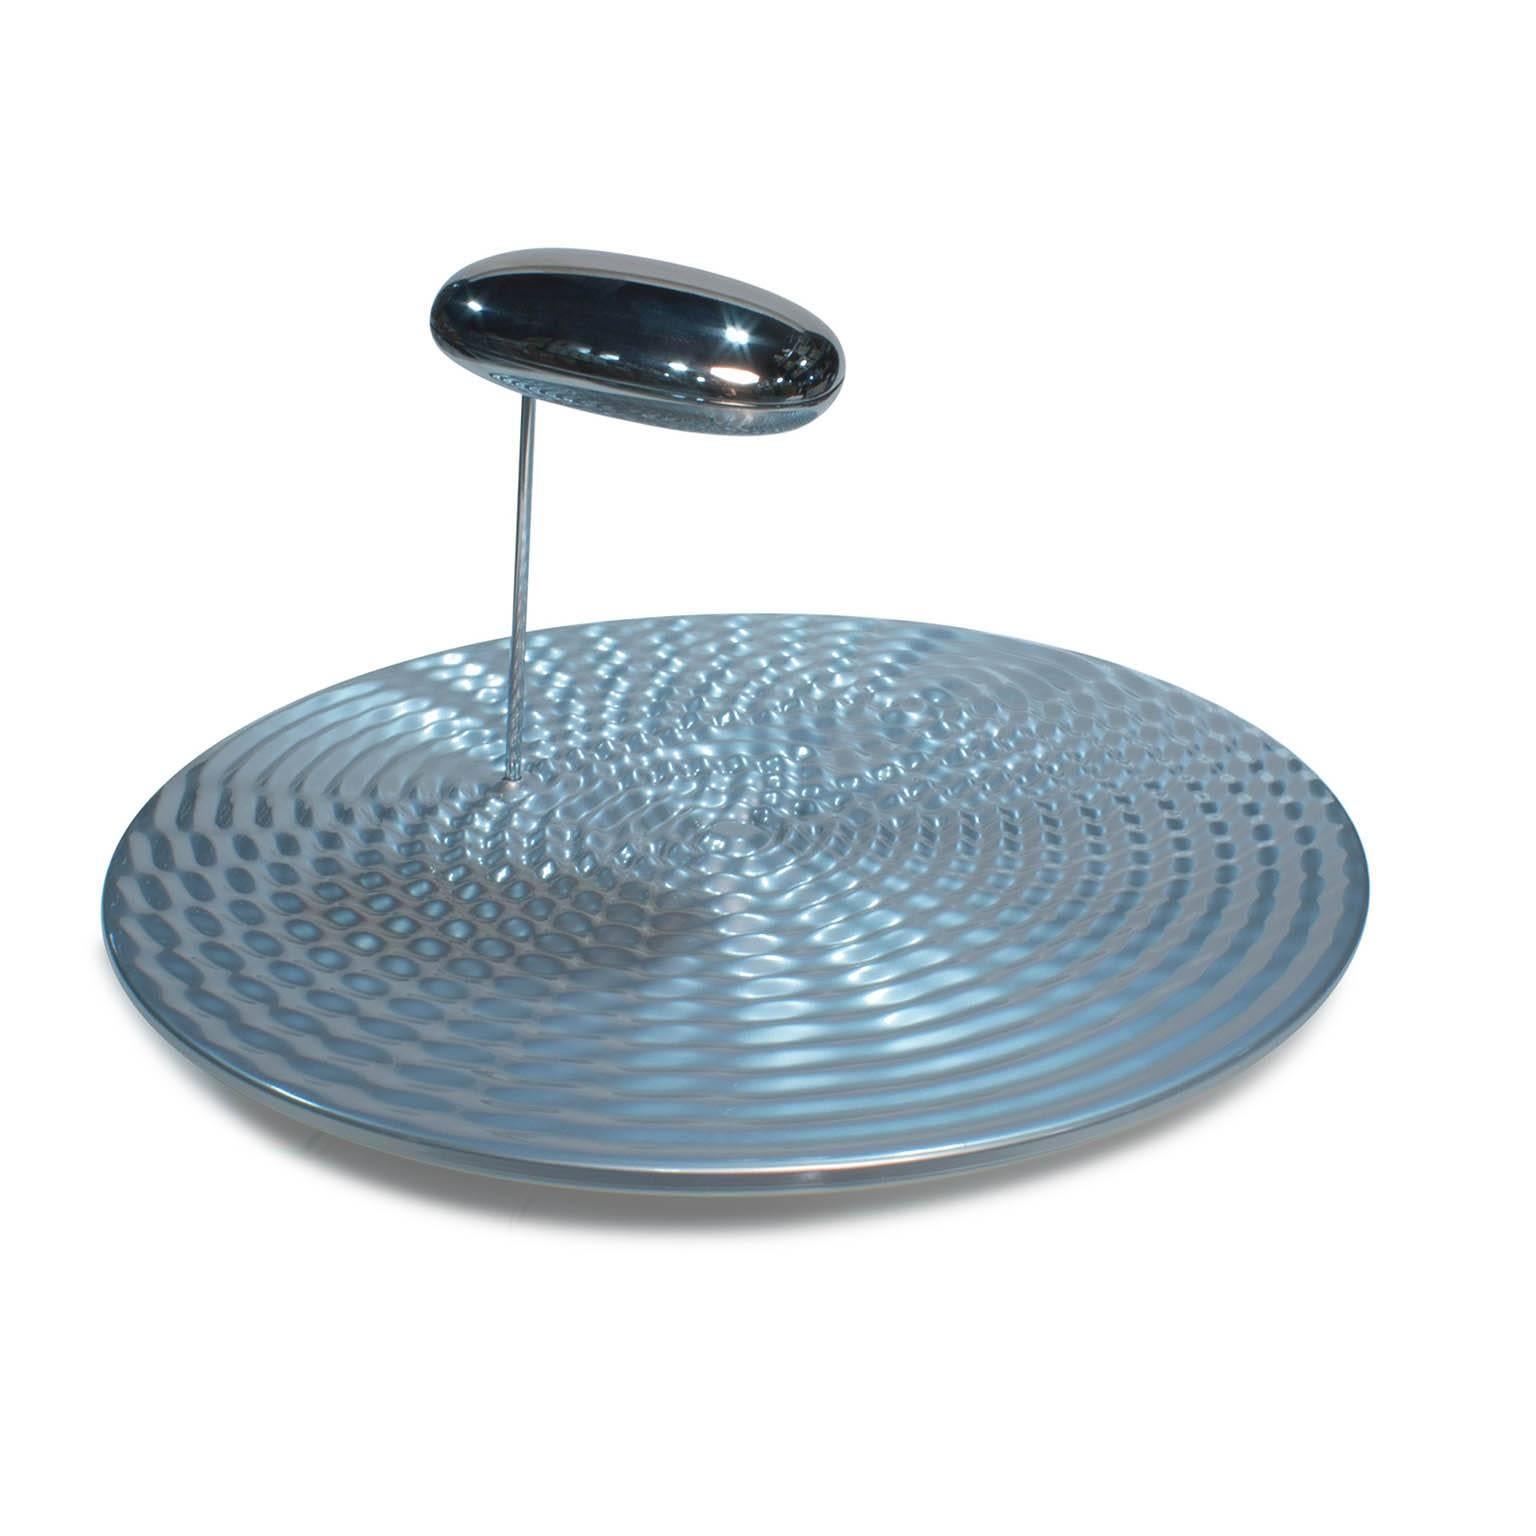 A ceiling fixture that places a floating assembly of large pebbles below a simple modern disc. These in turn reflect each other bouncing light between their taught bio - morphic surfaces and reflecting the environment around them. During the day the